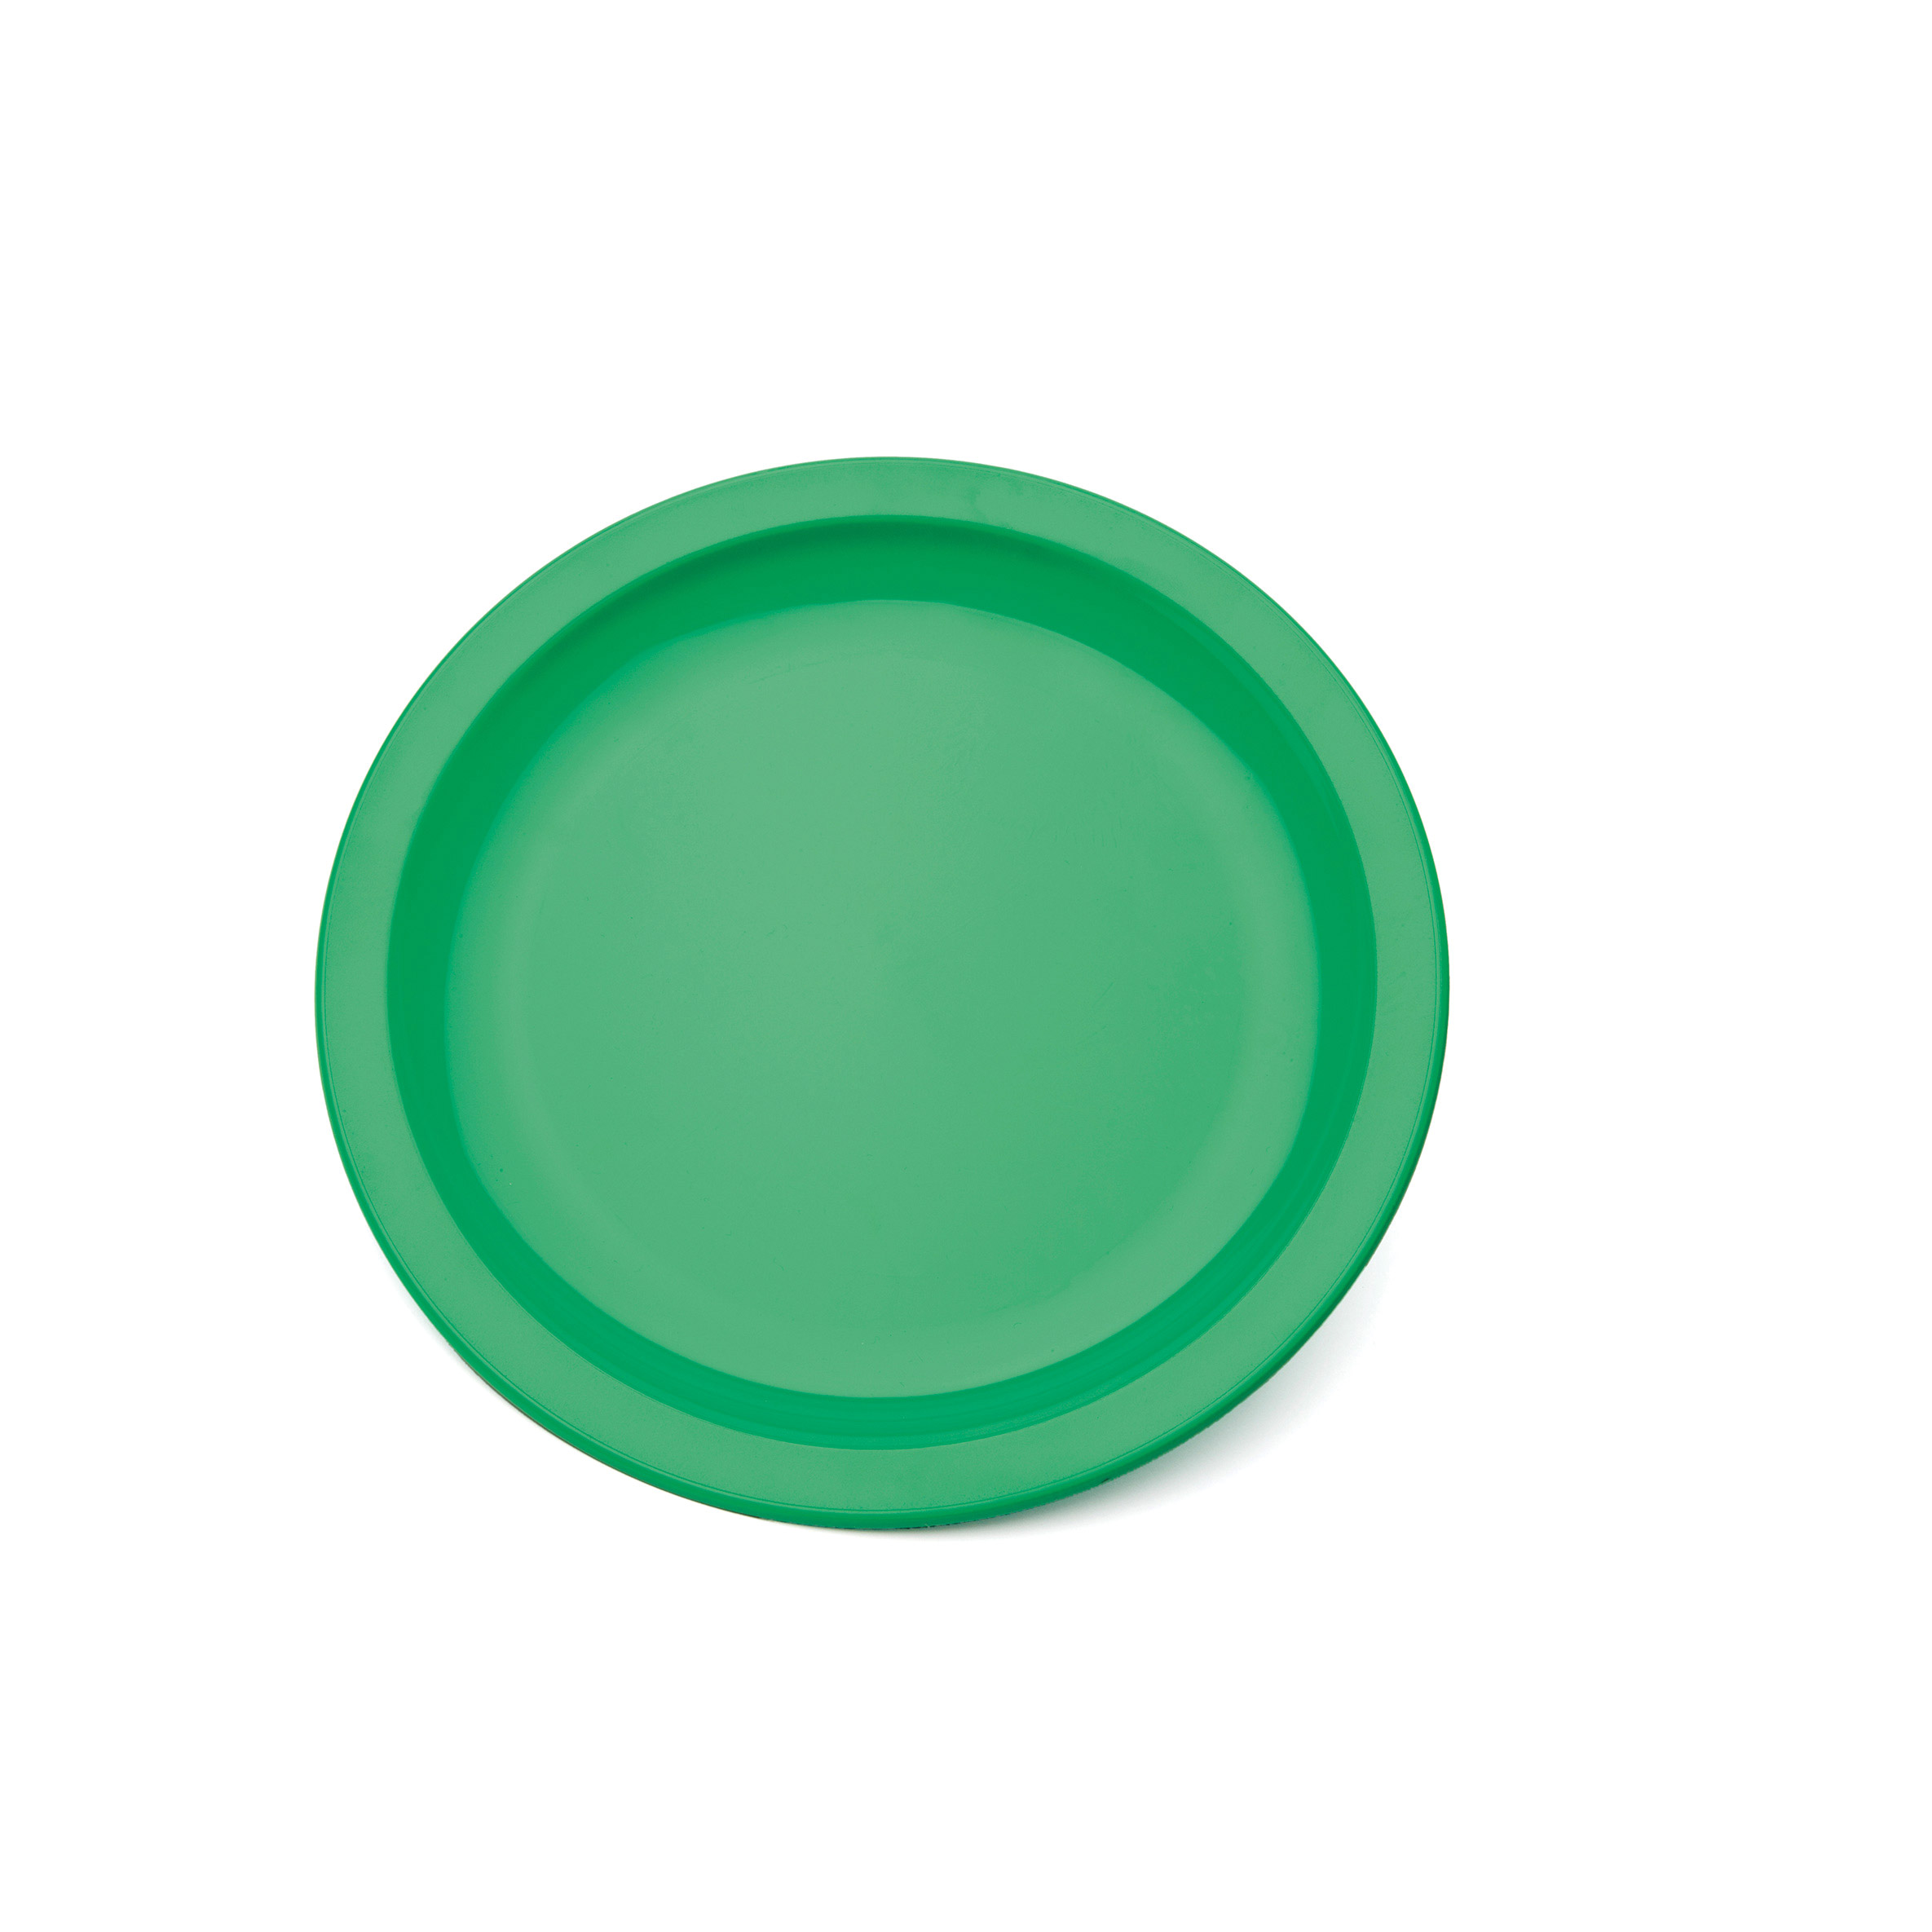 Polycarbonate Side Plate 17Cm Emerald Green - Each